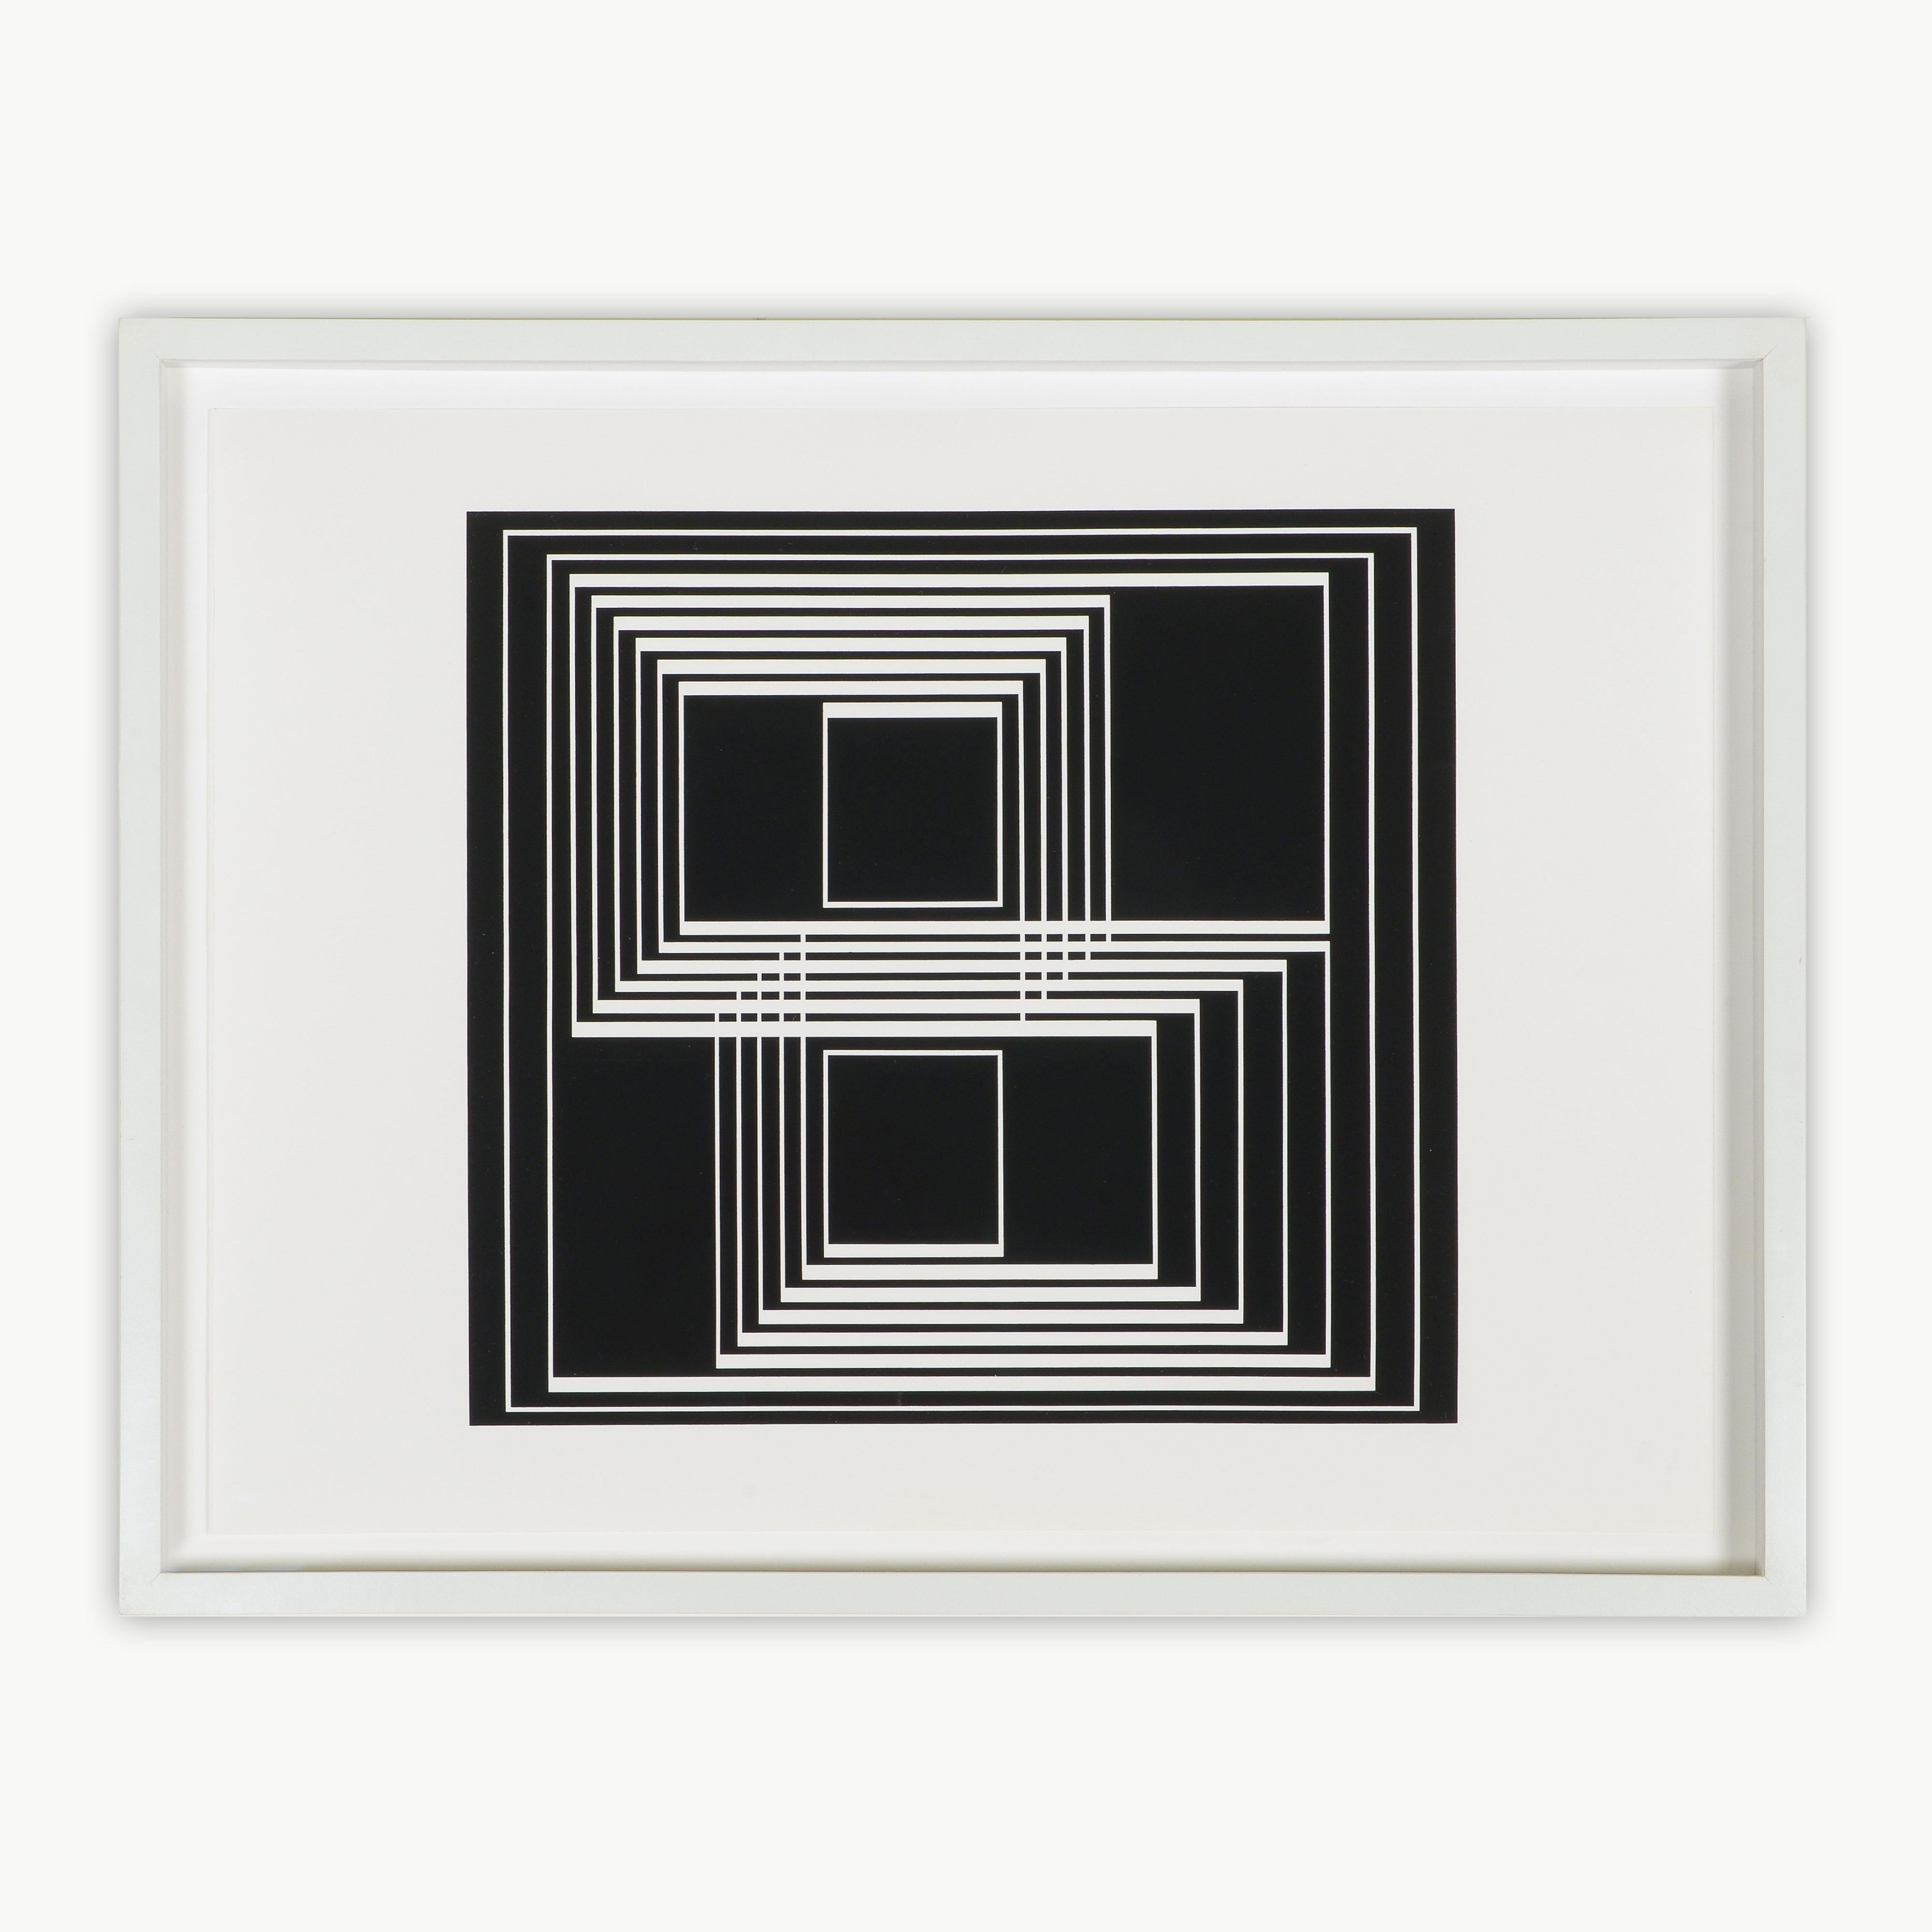 Abstract Print Josef Albers - L'isolement